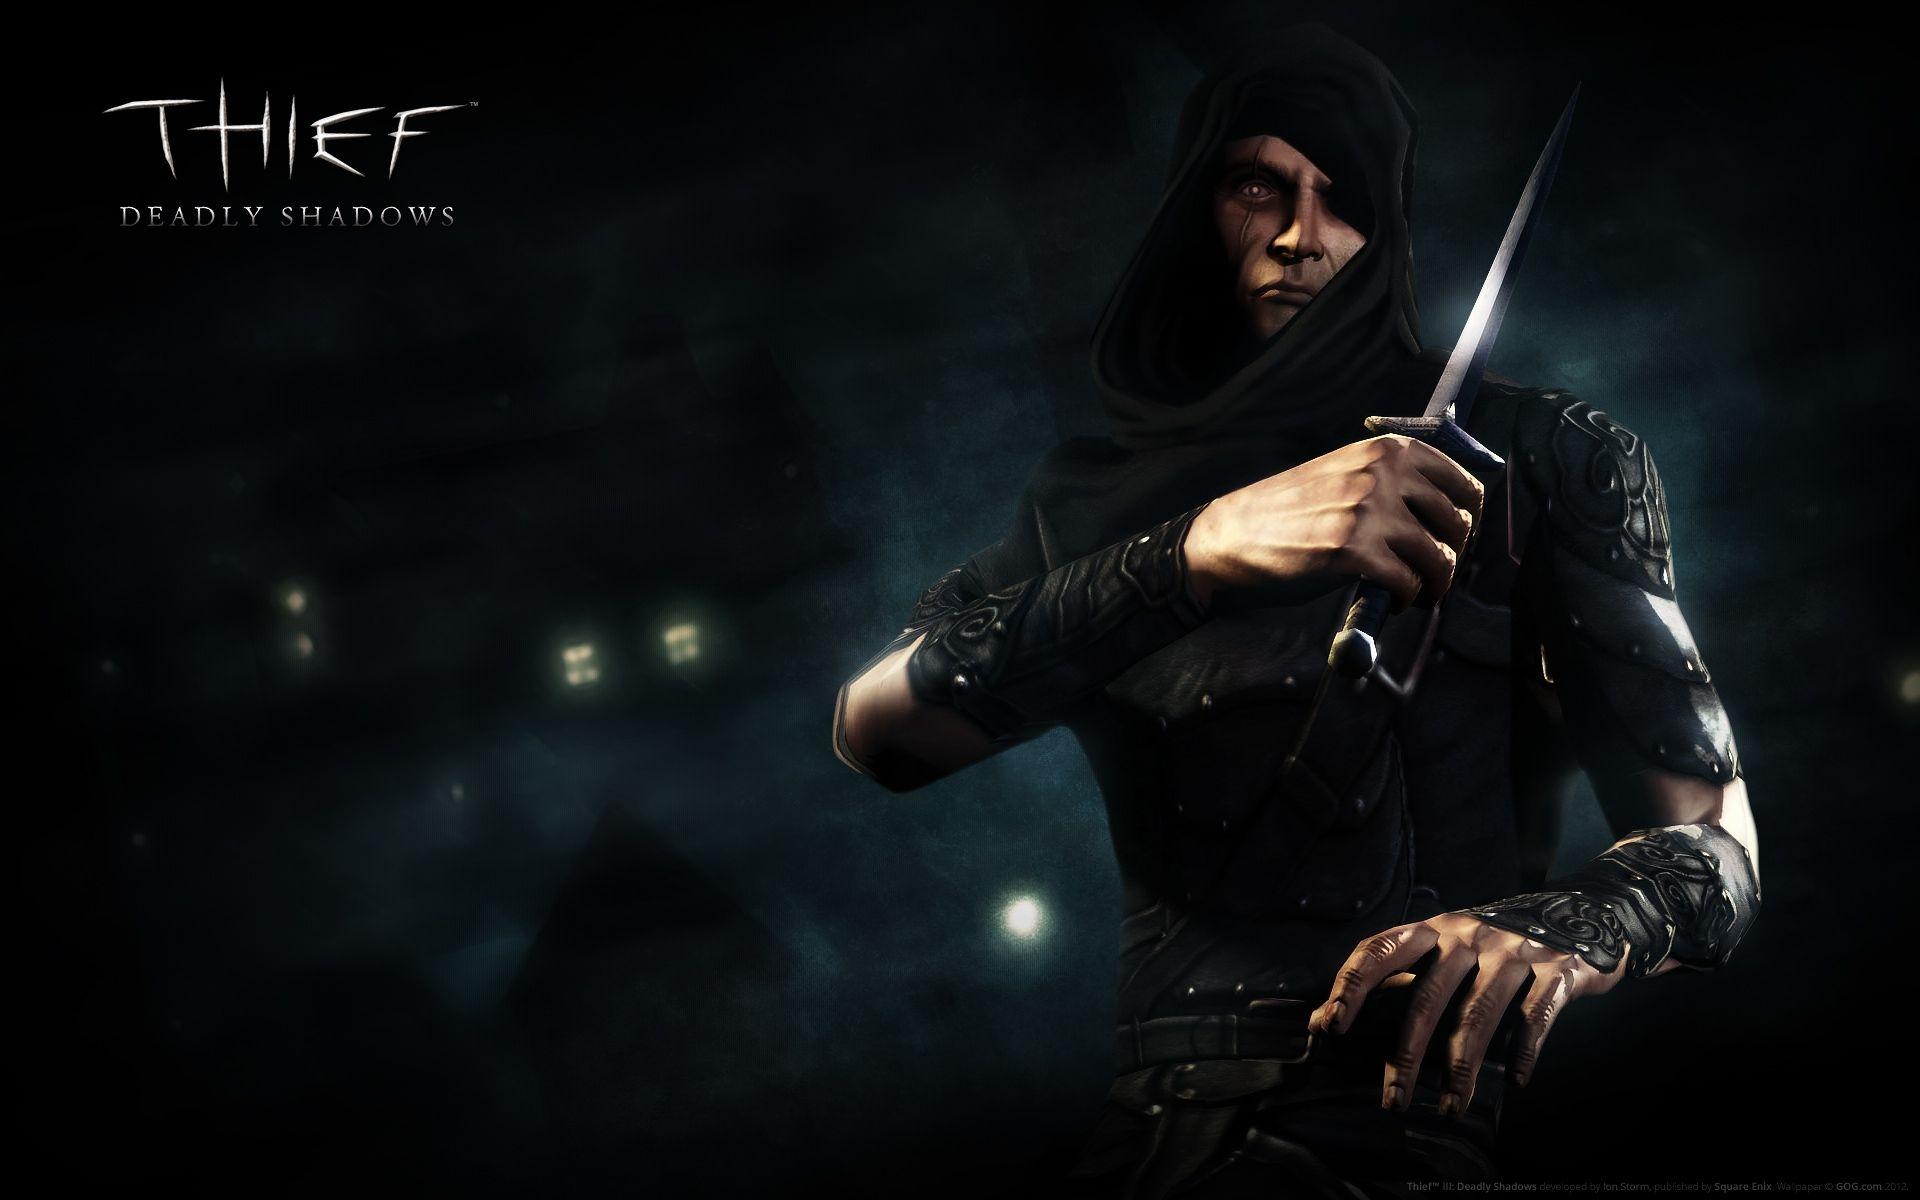 Thief Deadly Shadows 2K Wallpapers